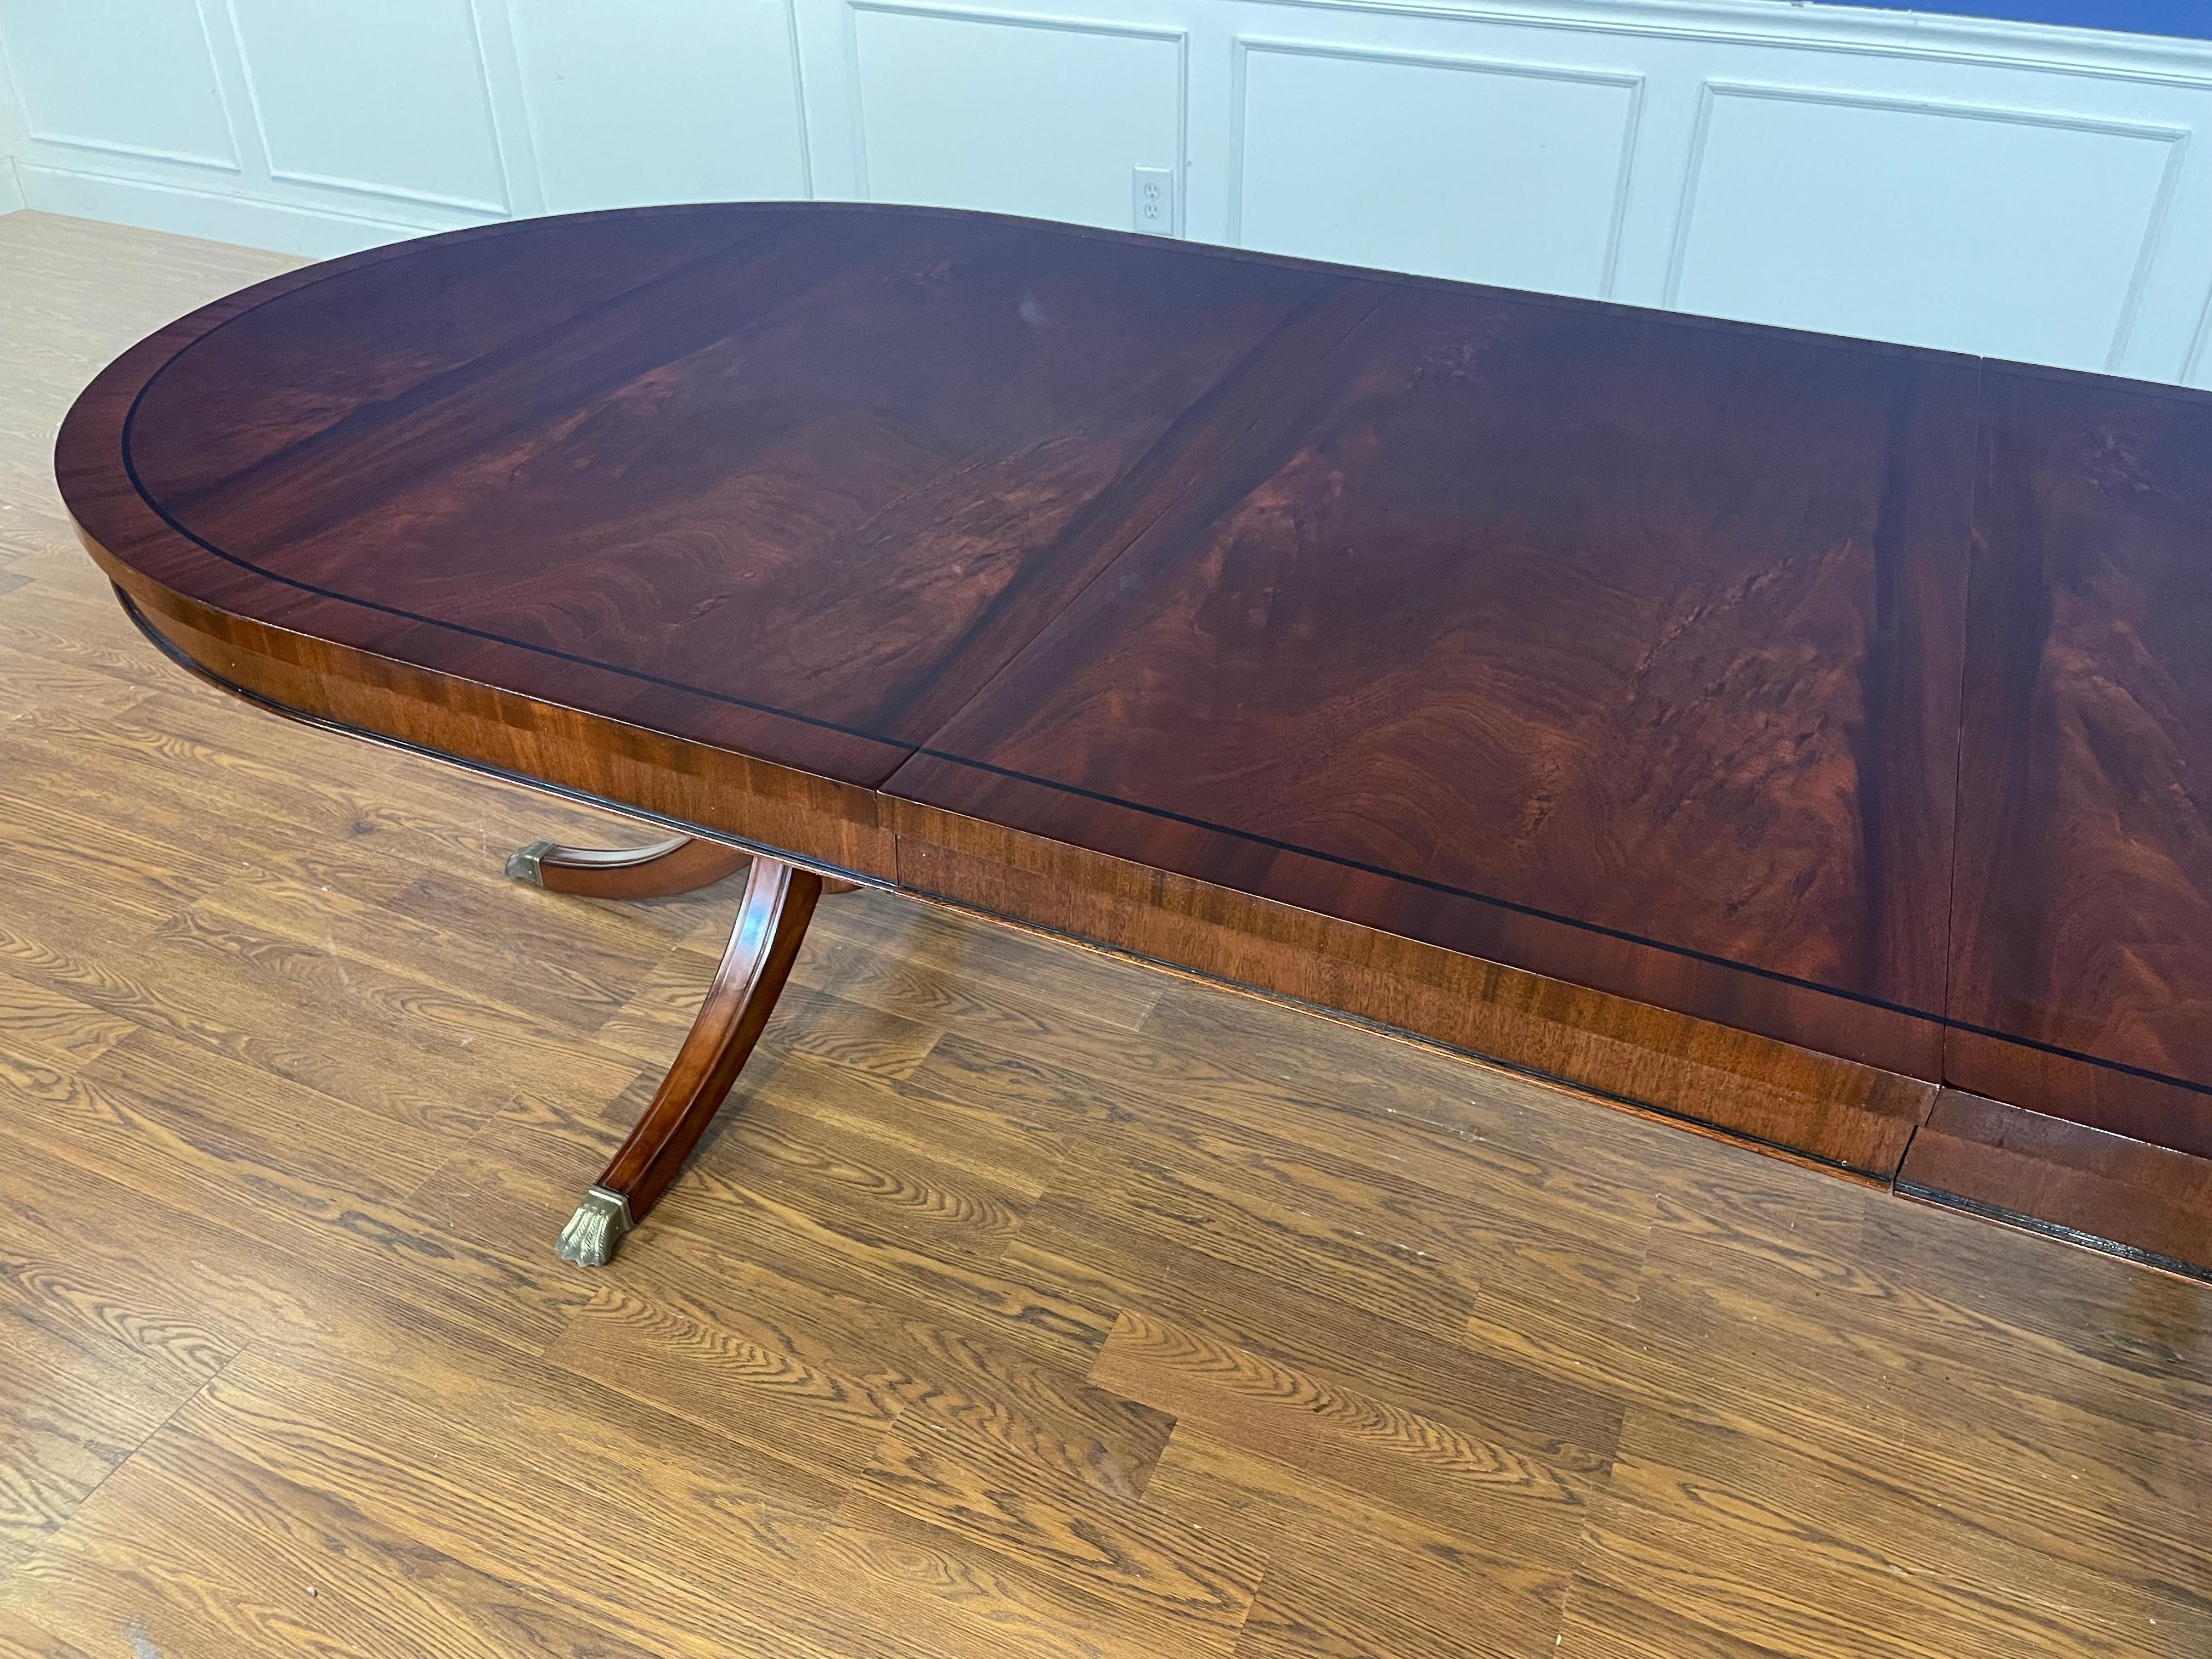 American Oval Mahogany Double Pedestal Dining Table by Leighton Hall Made-To-Order For Sale